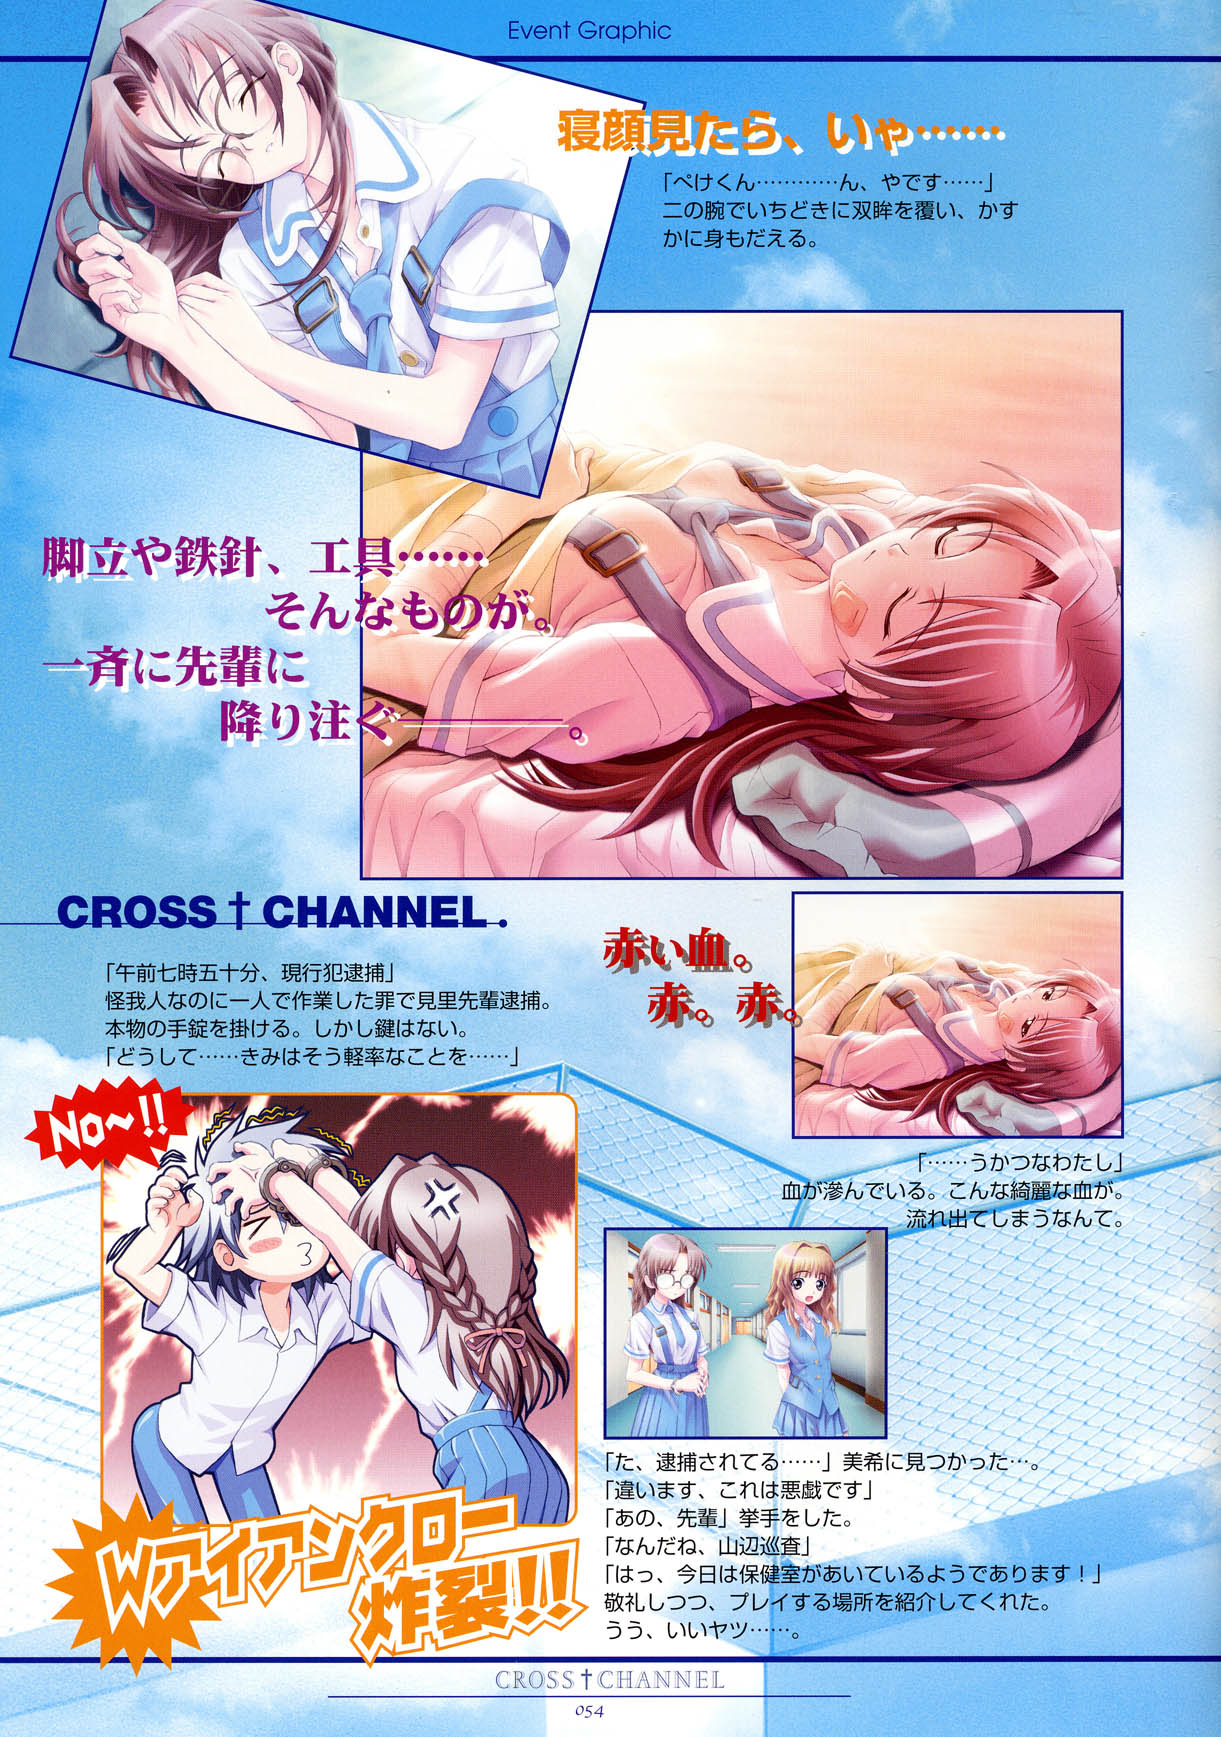 [FlyingShine (Matsuryuu)] CROSS&dagger;CHANNEL Official Illust CG Art Gallery Complete Collection [FlyingShine (松竜)] CROSS&dagger;CHANNEL 公式設定資料集